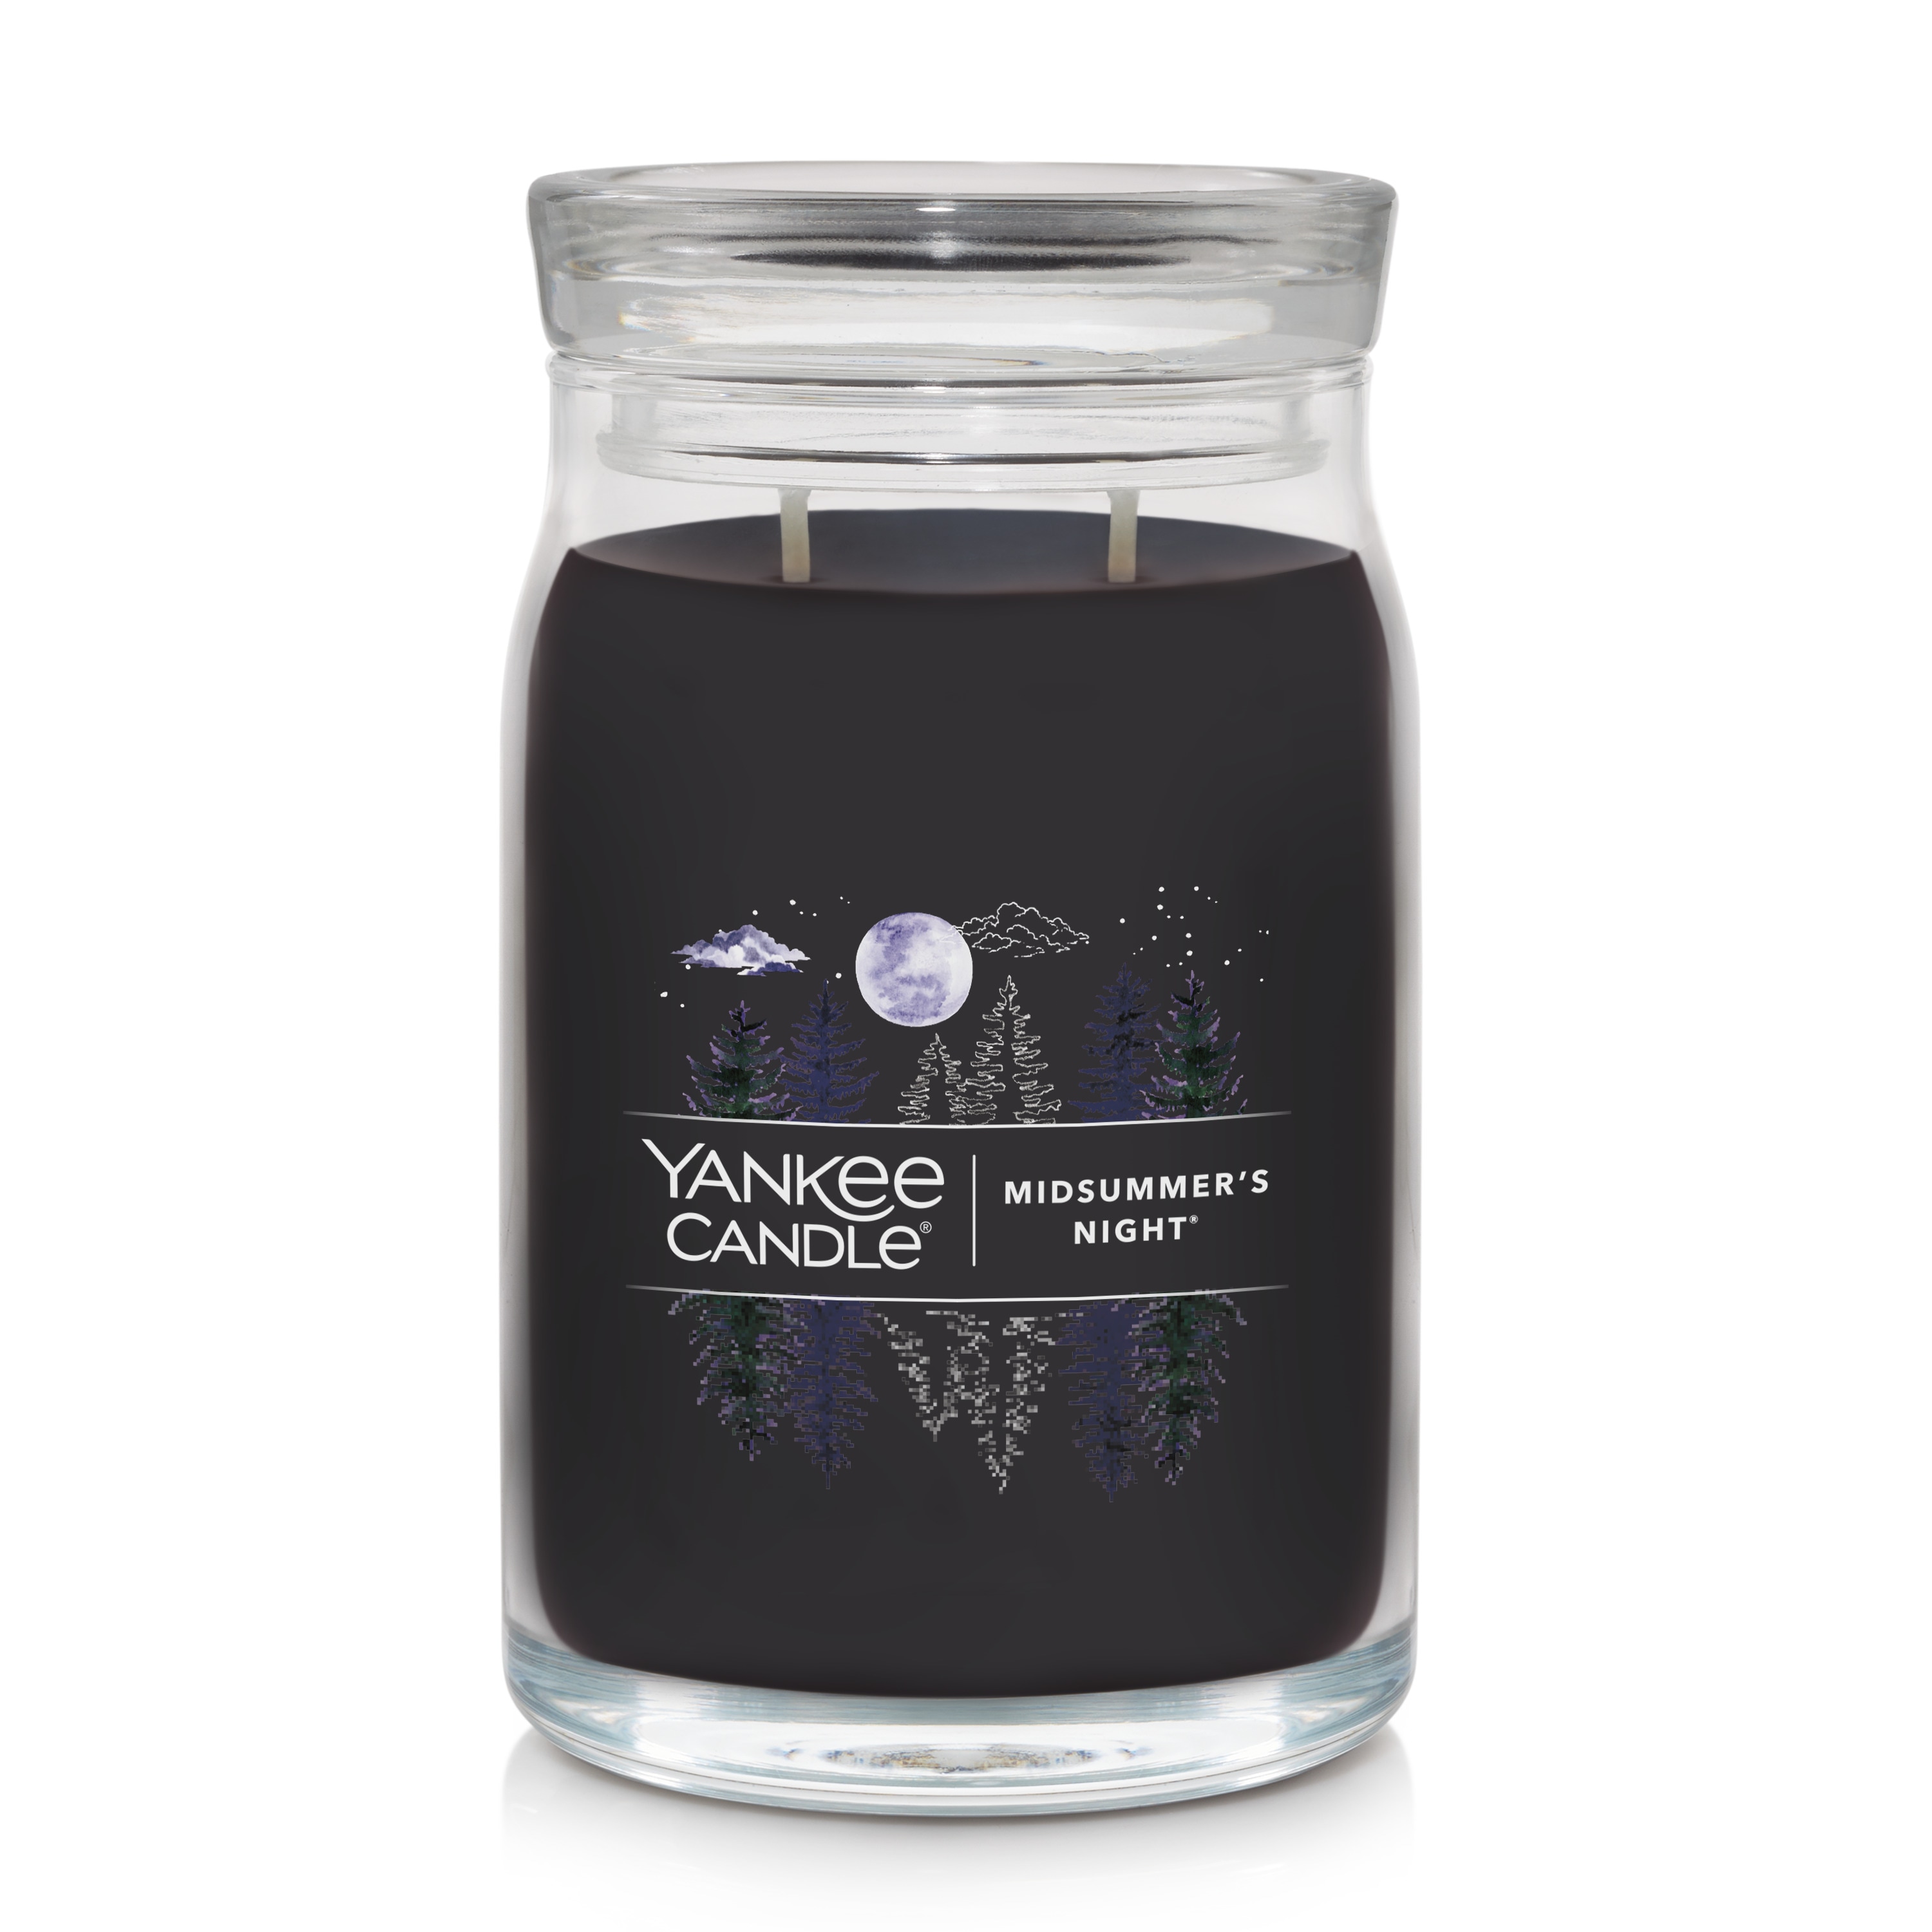 Yankee Candle Candles & Home Fragrances at